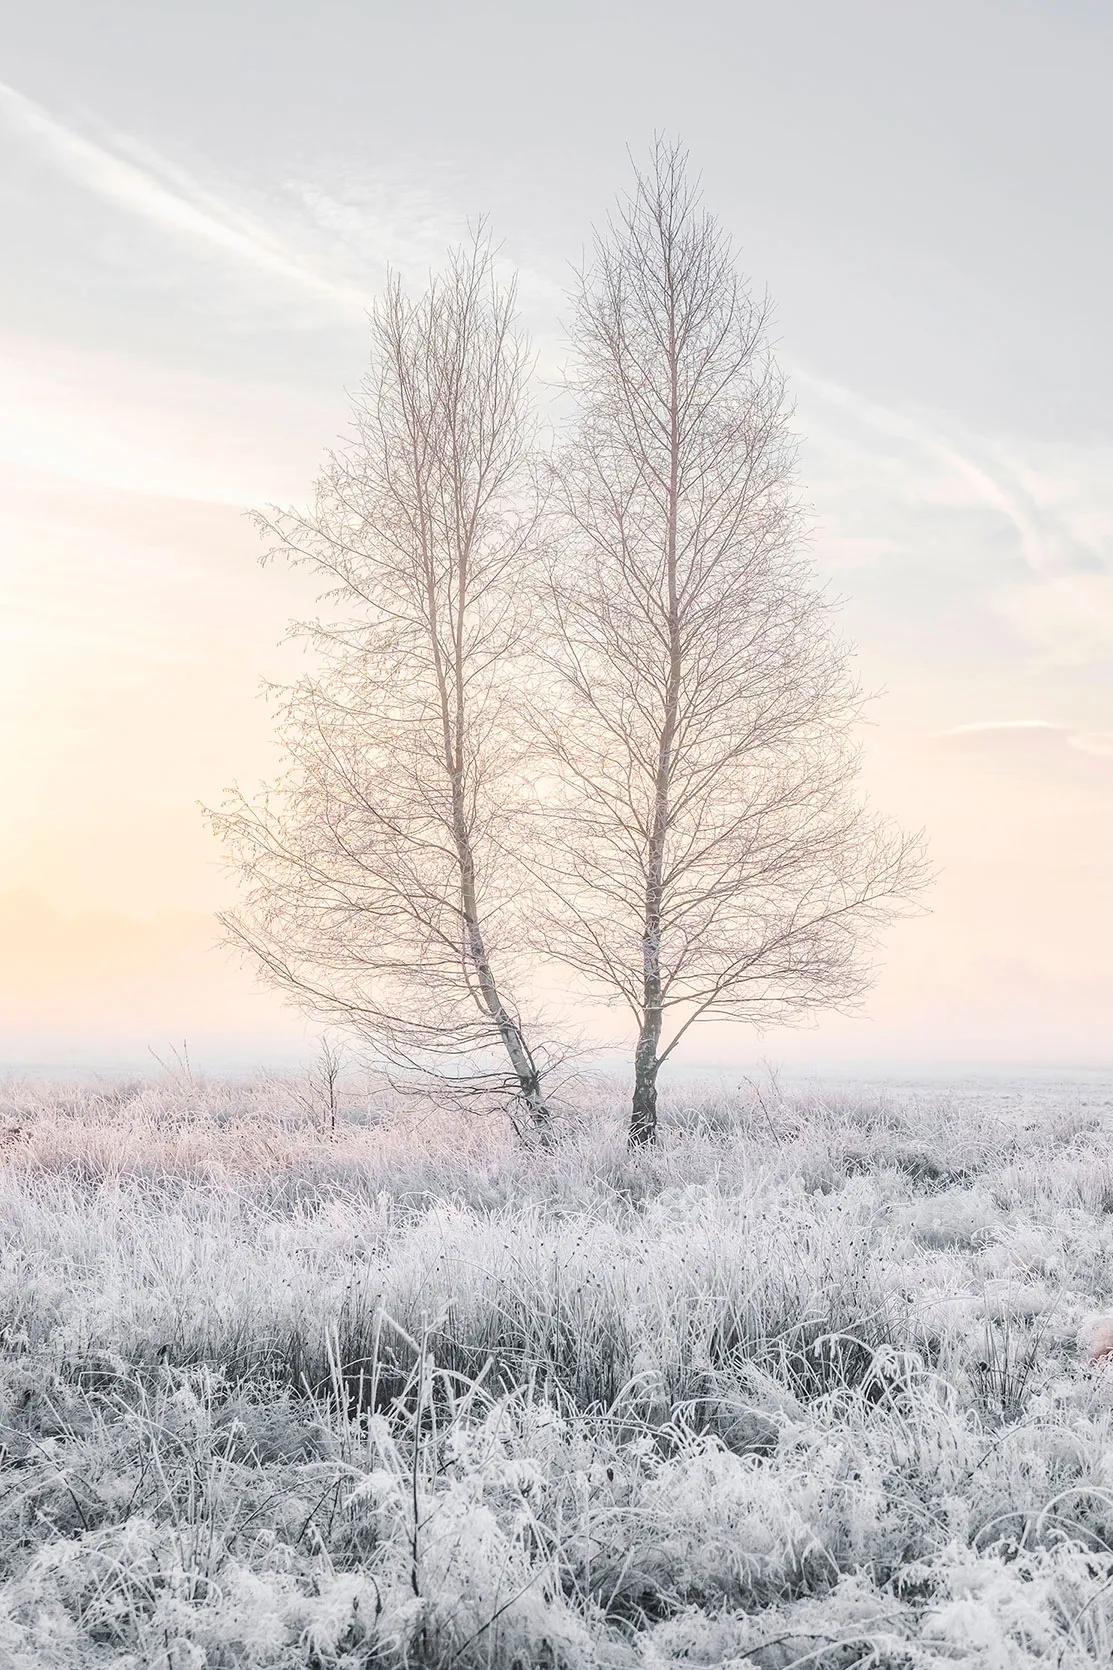 A bare tree in frost